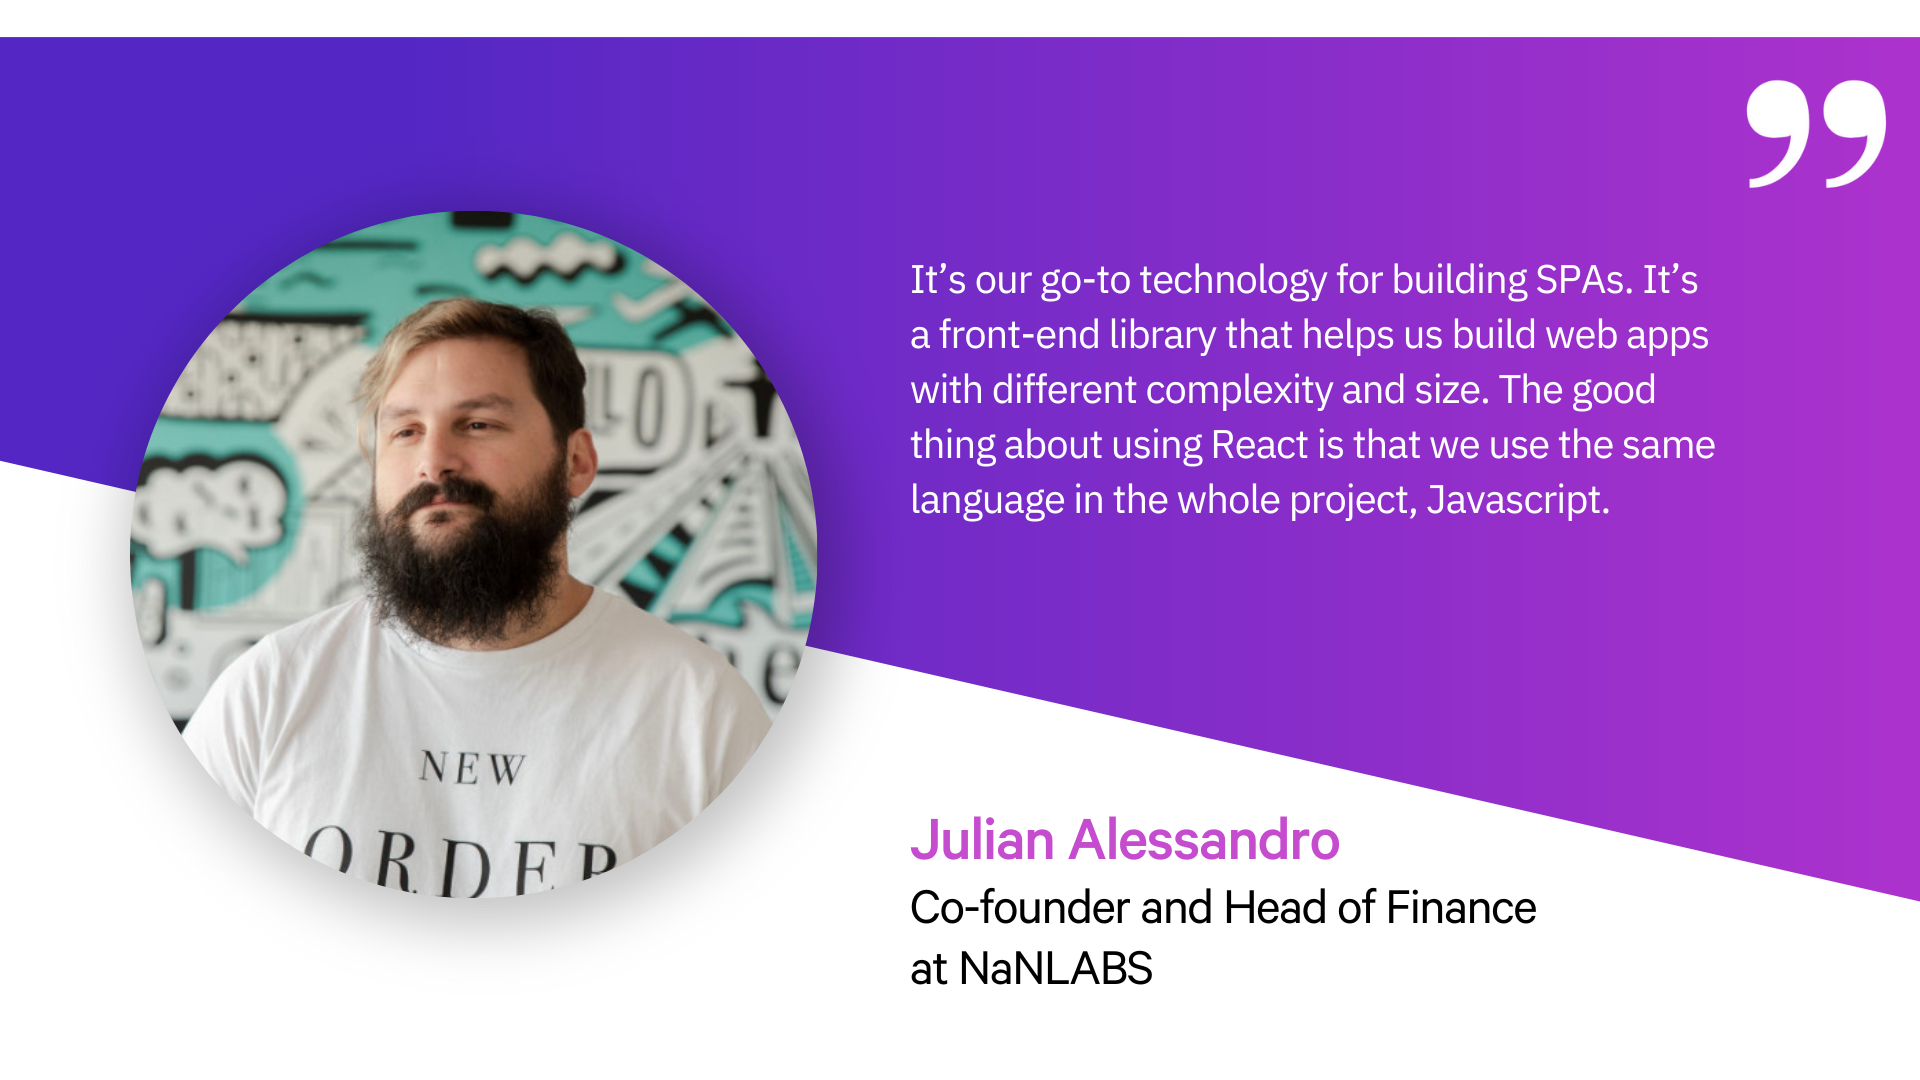 Quote on React.js by Julian Alessandro, co-founder at NaNLABS